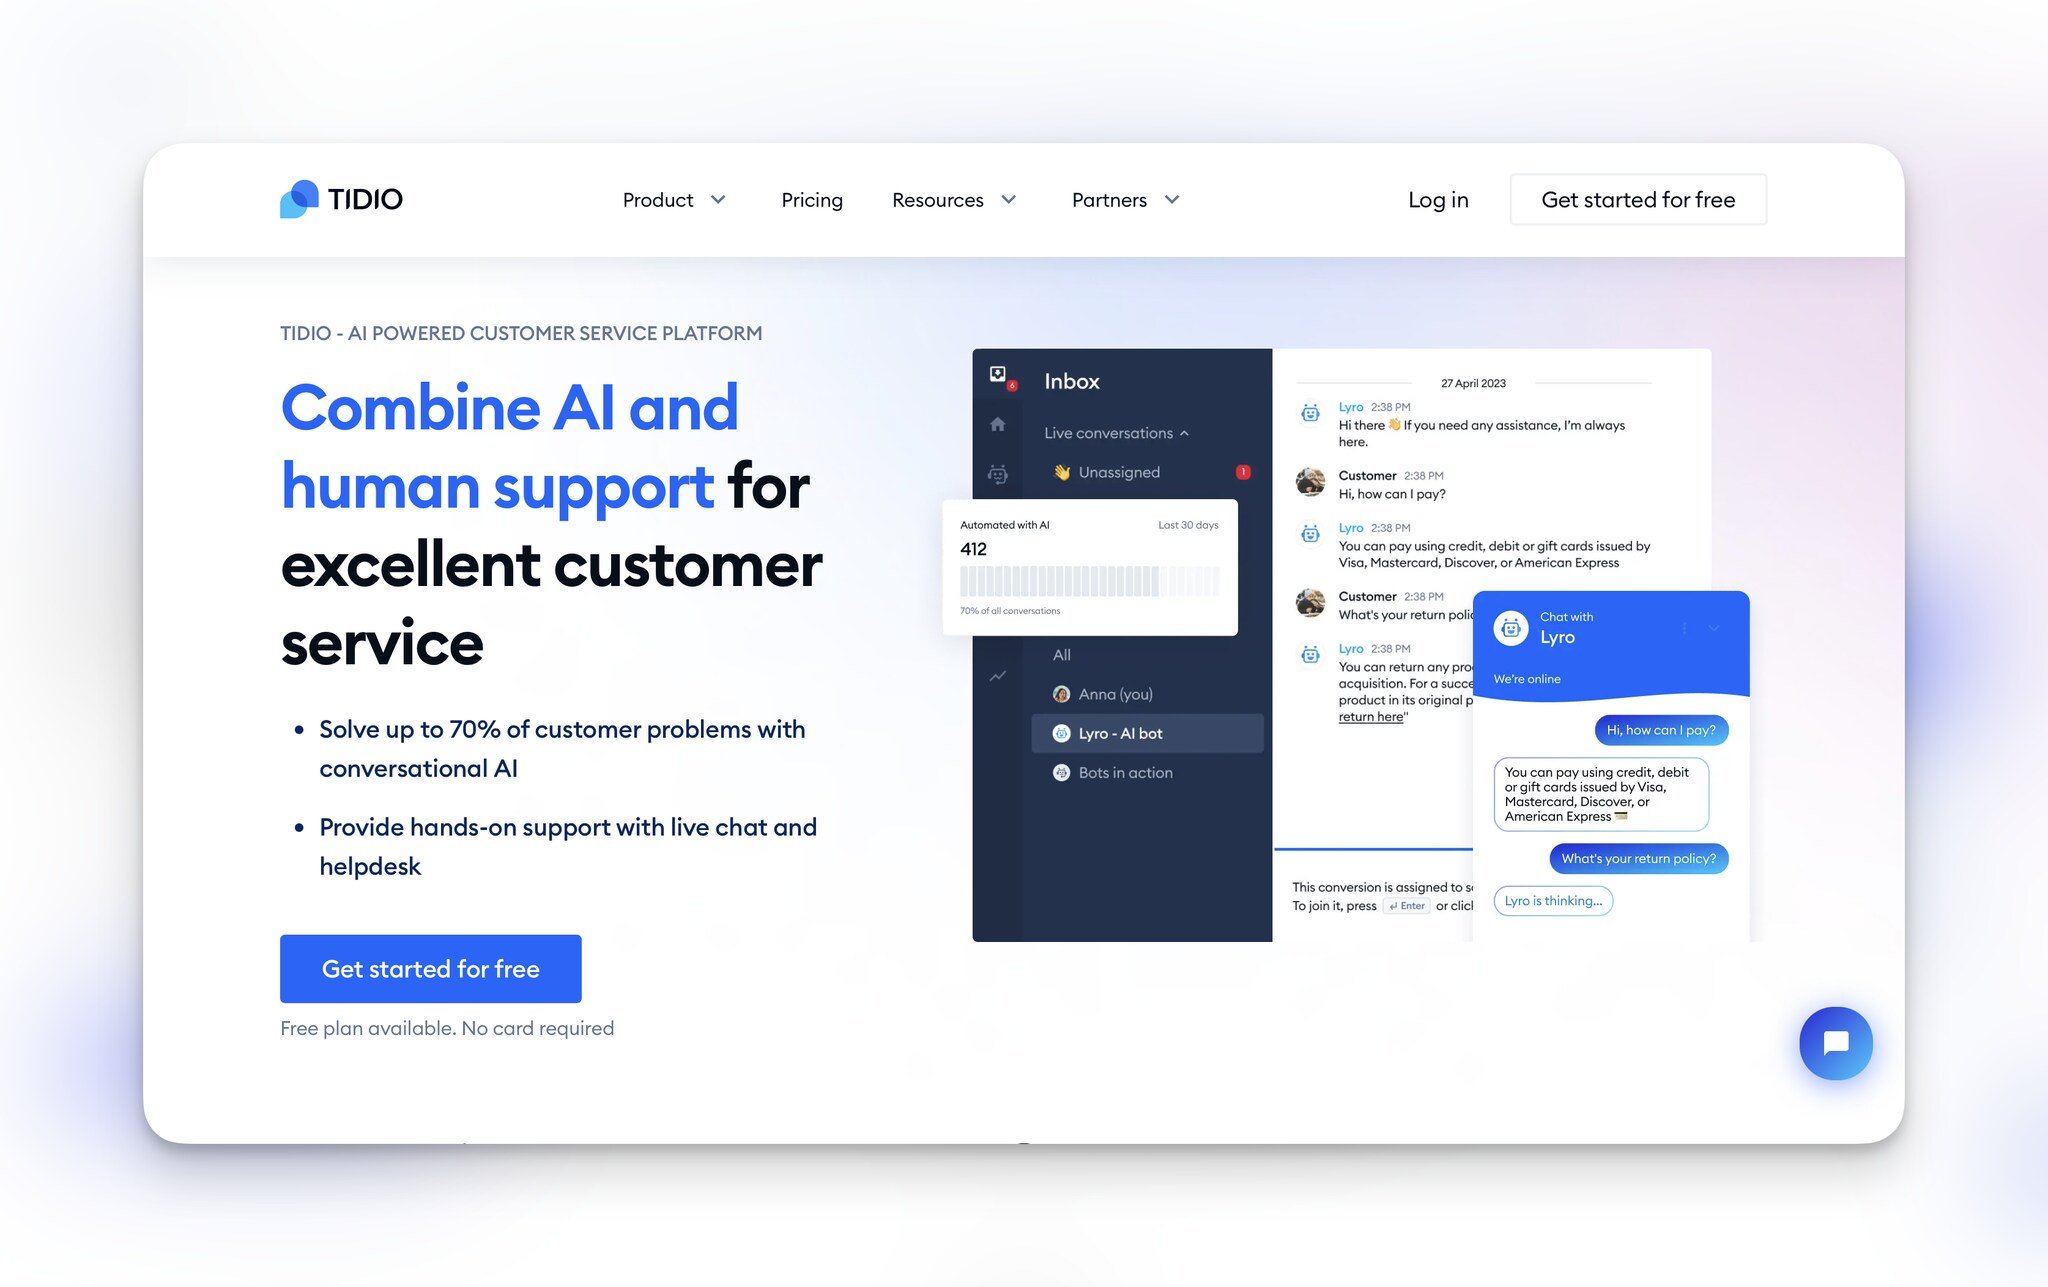 Tidio's homepage "Combine AI and human support for excellent customer service" followed by a blue "Get started for free" and on the right, there is the interface of the product and the chat window